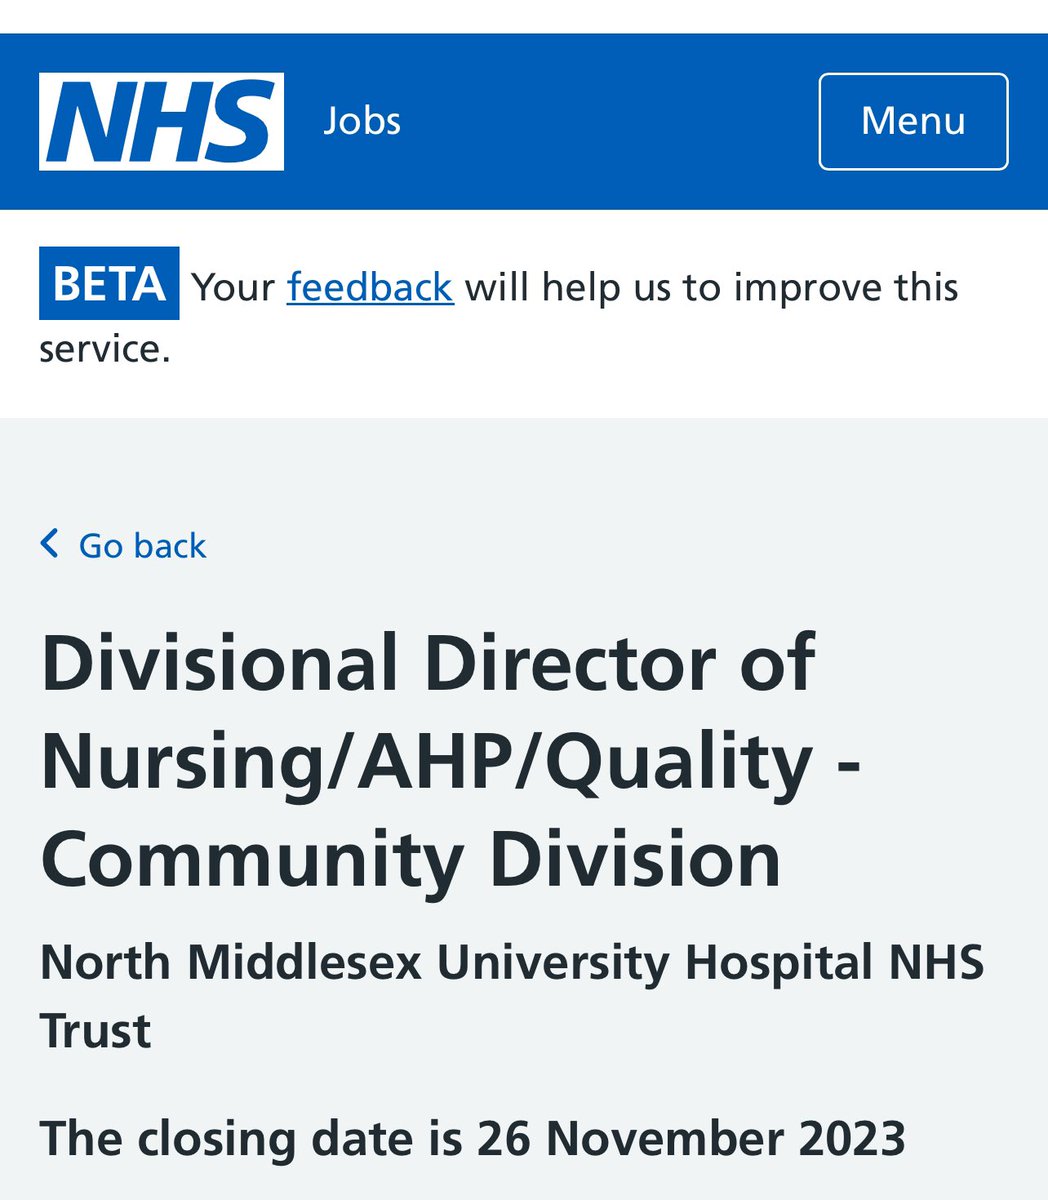 🚨#AHP senior job opportunity 📑Divisional Director of Nursing / AHP & Quality @NorthMidNHS 📑AfC 8d, F/T, Permanent, in community services ⏰Closing 26 November 👀Details 👉jobs.nhs.uk/candidate/joba… @WeAHPs